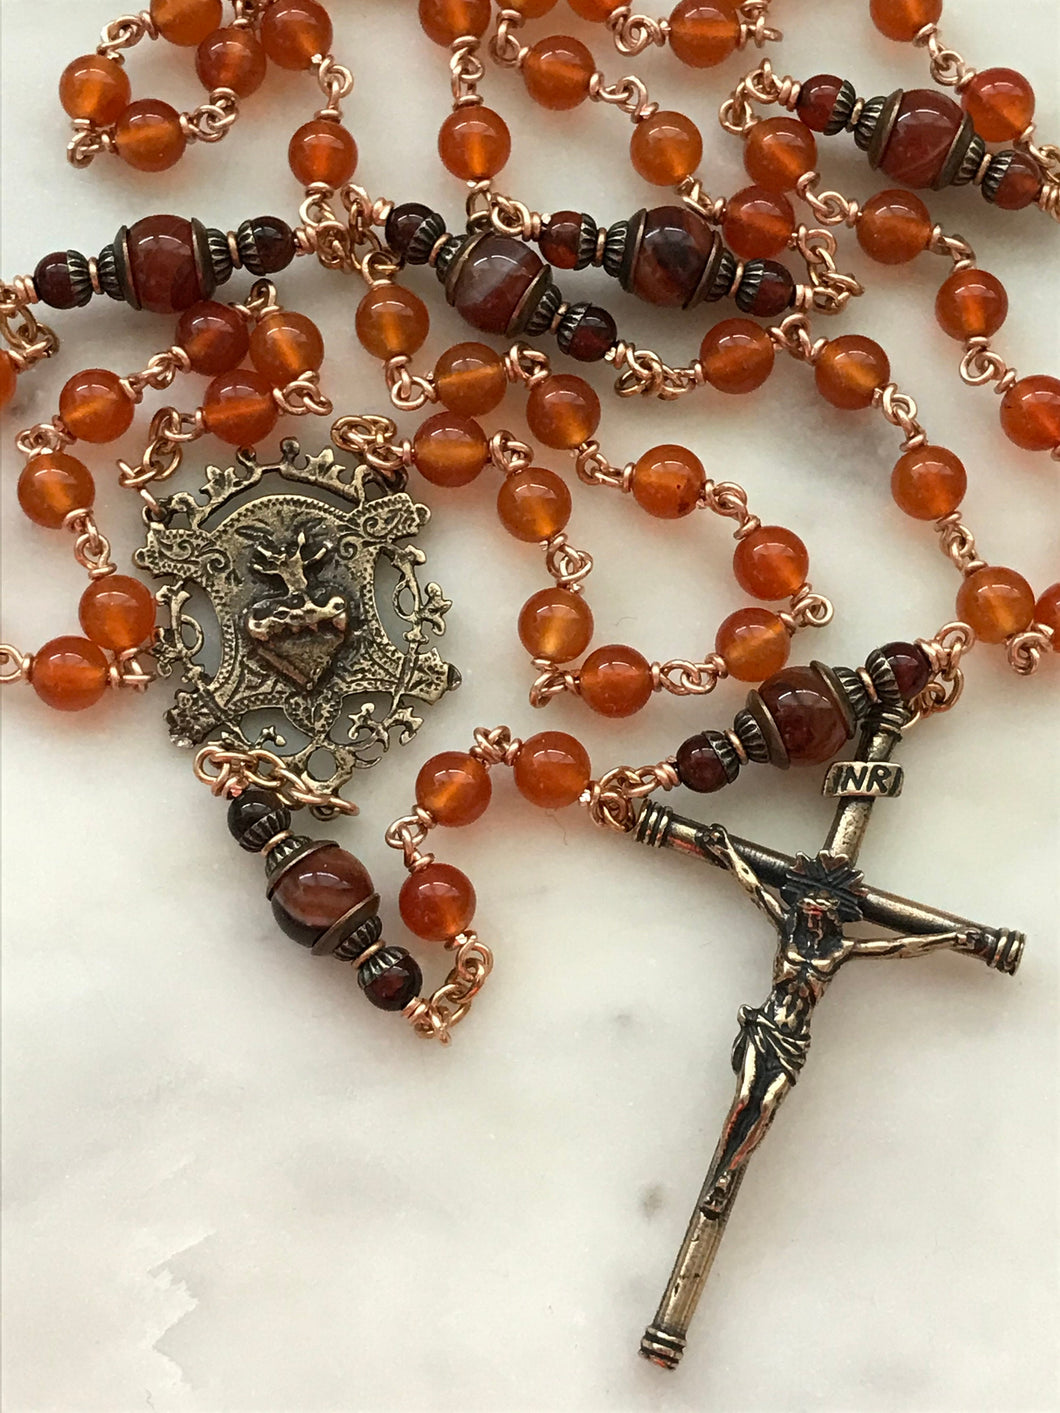 Carnelian and Bronze Rosary - Sacred Heart - Spanish Crucifix CeCeAgnes